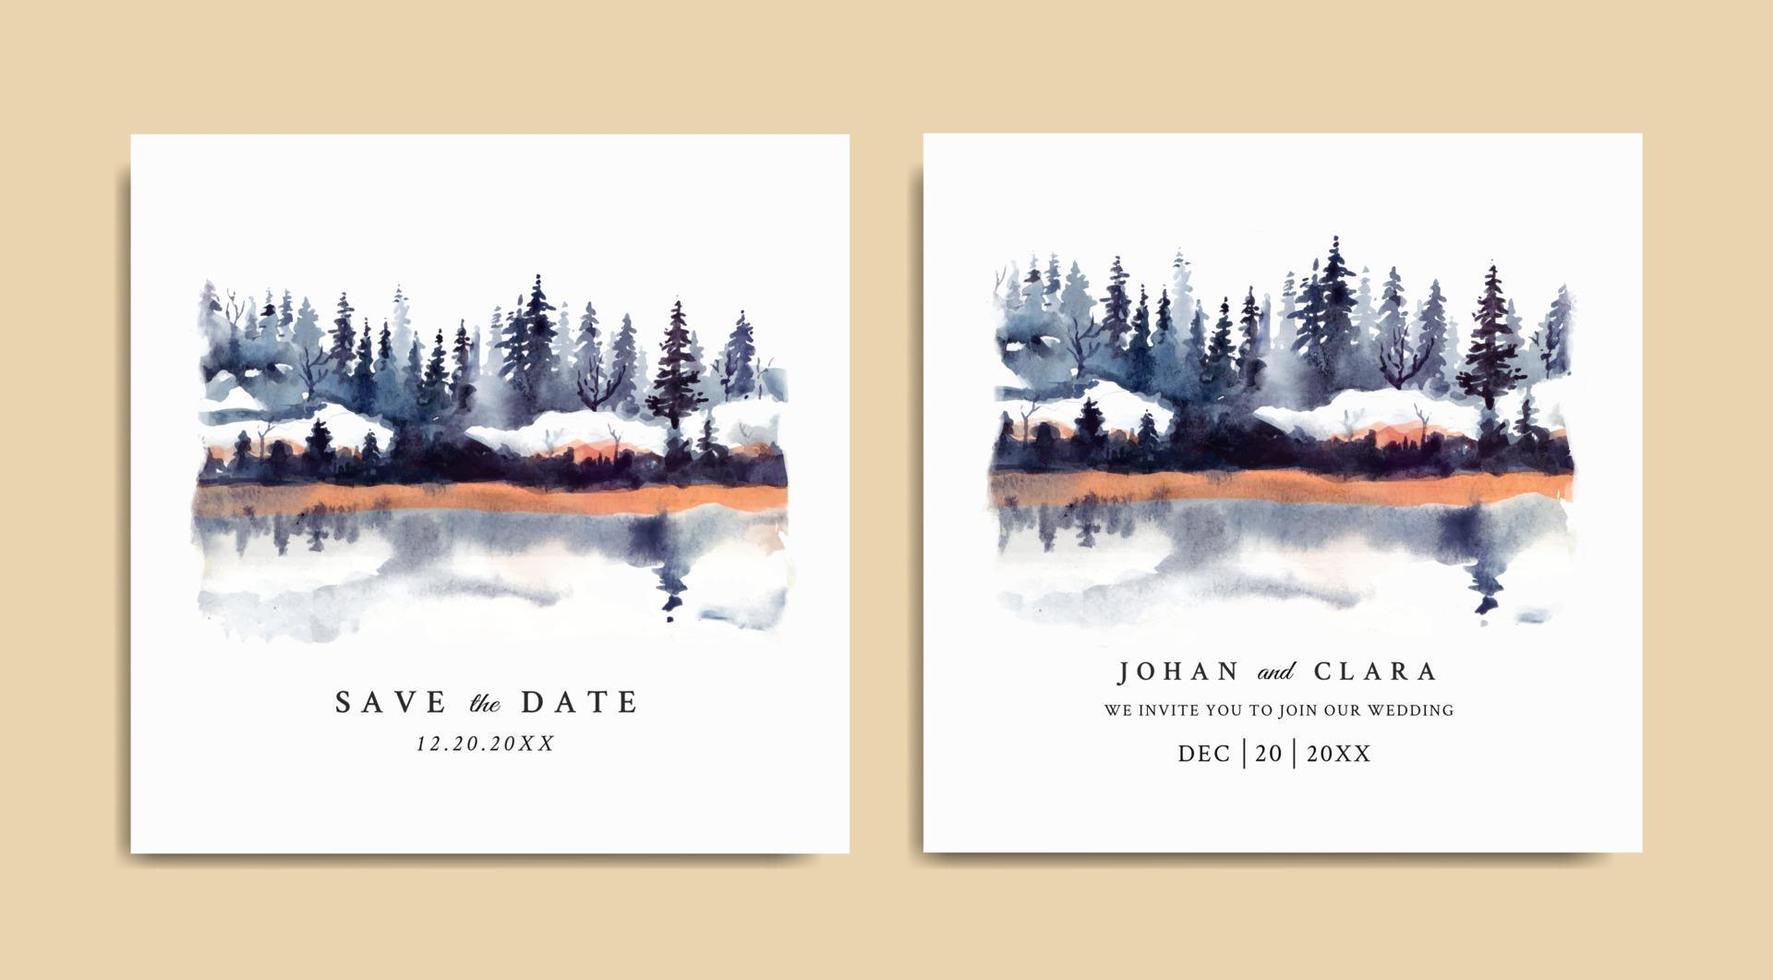 Wedding invitation of winter landscape with pine trees and snow watercolor vector